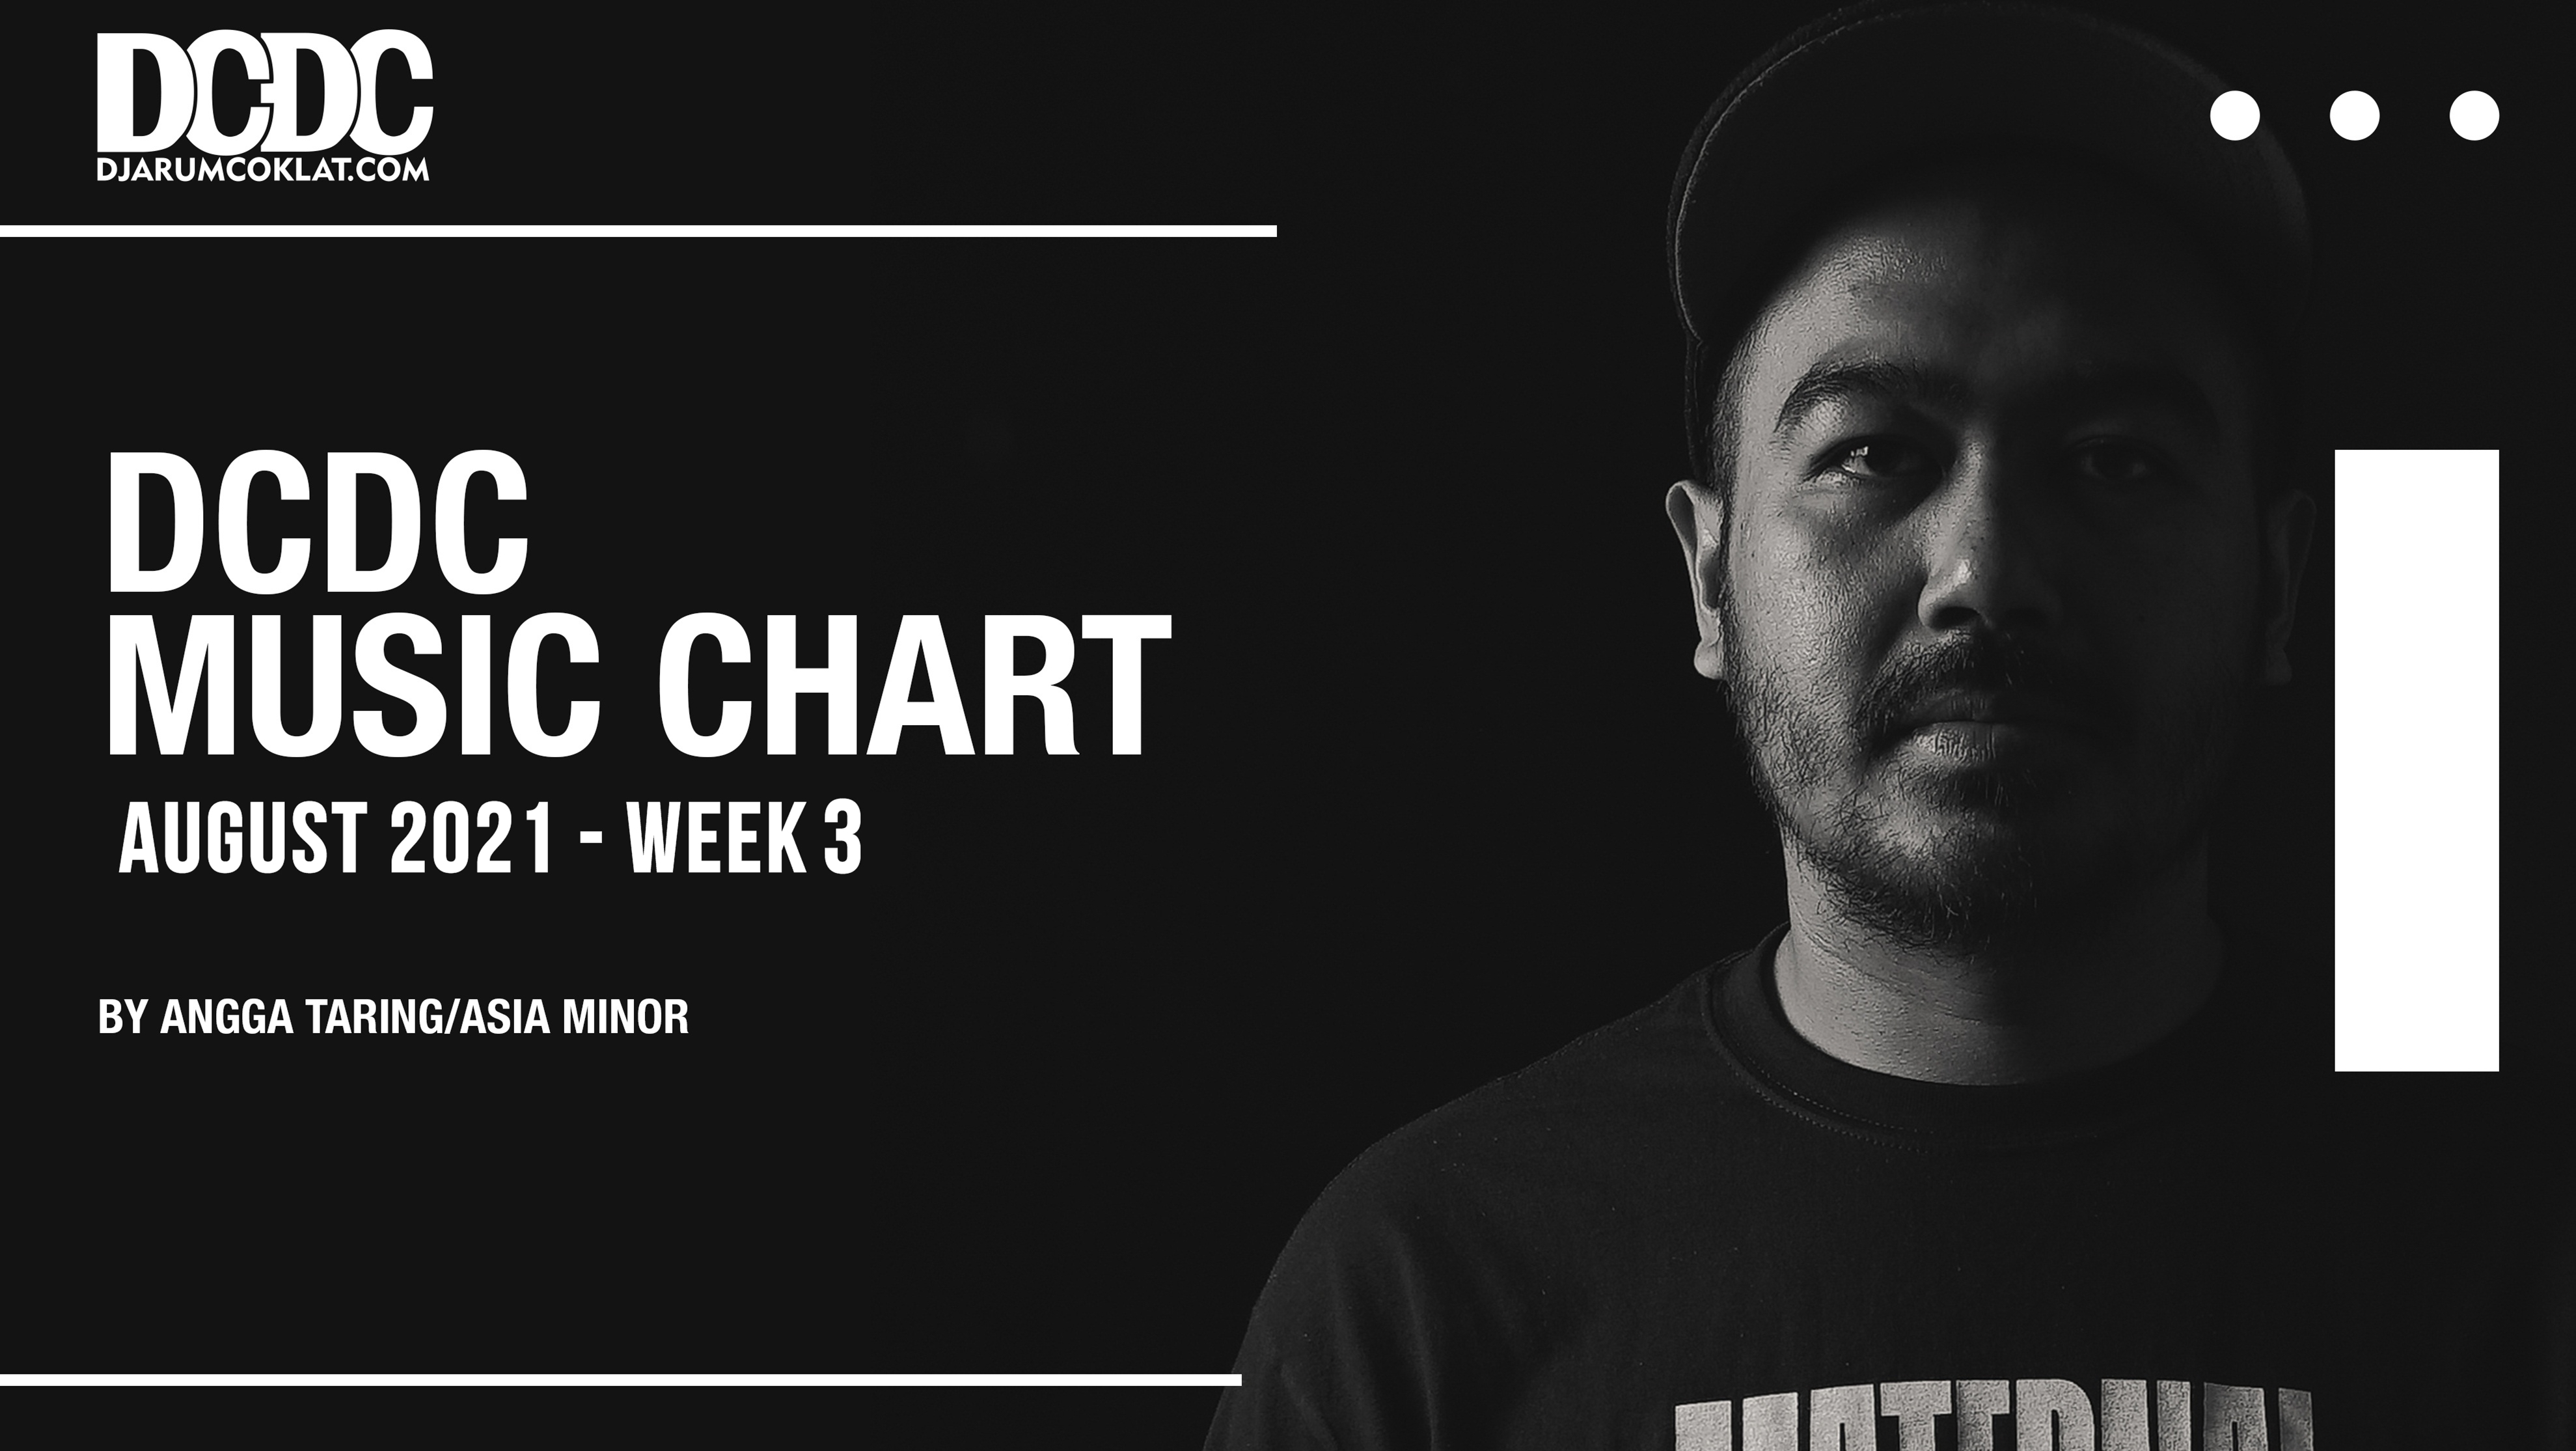 DCDC Music Chart - #3rd Week of August 2021